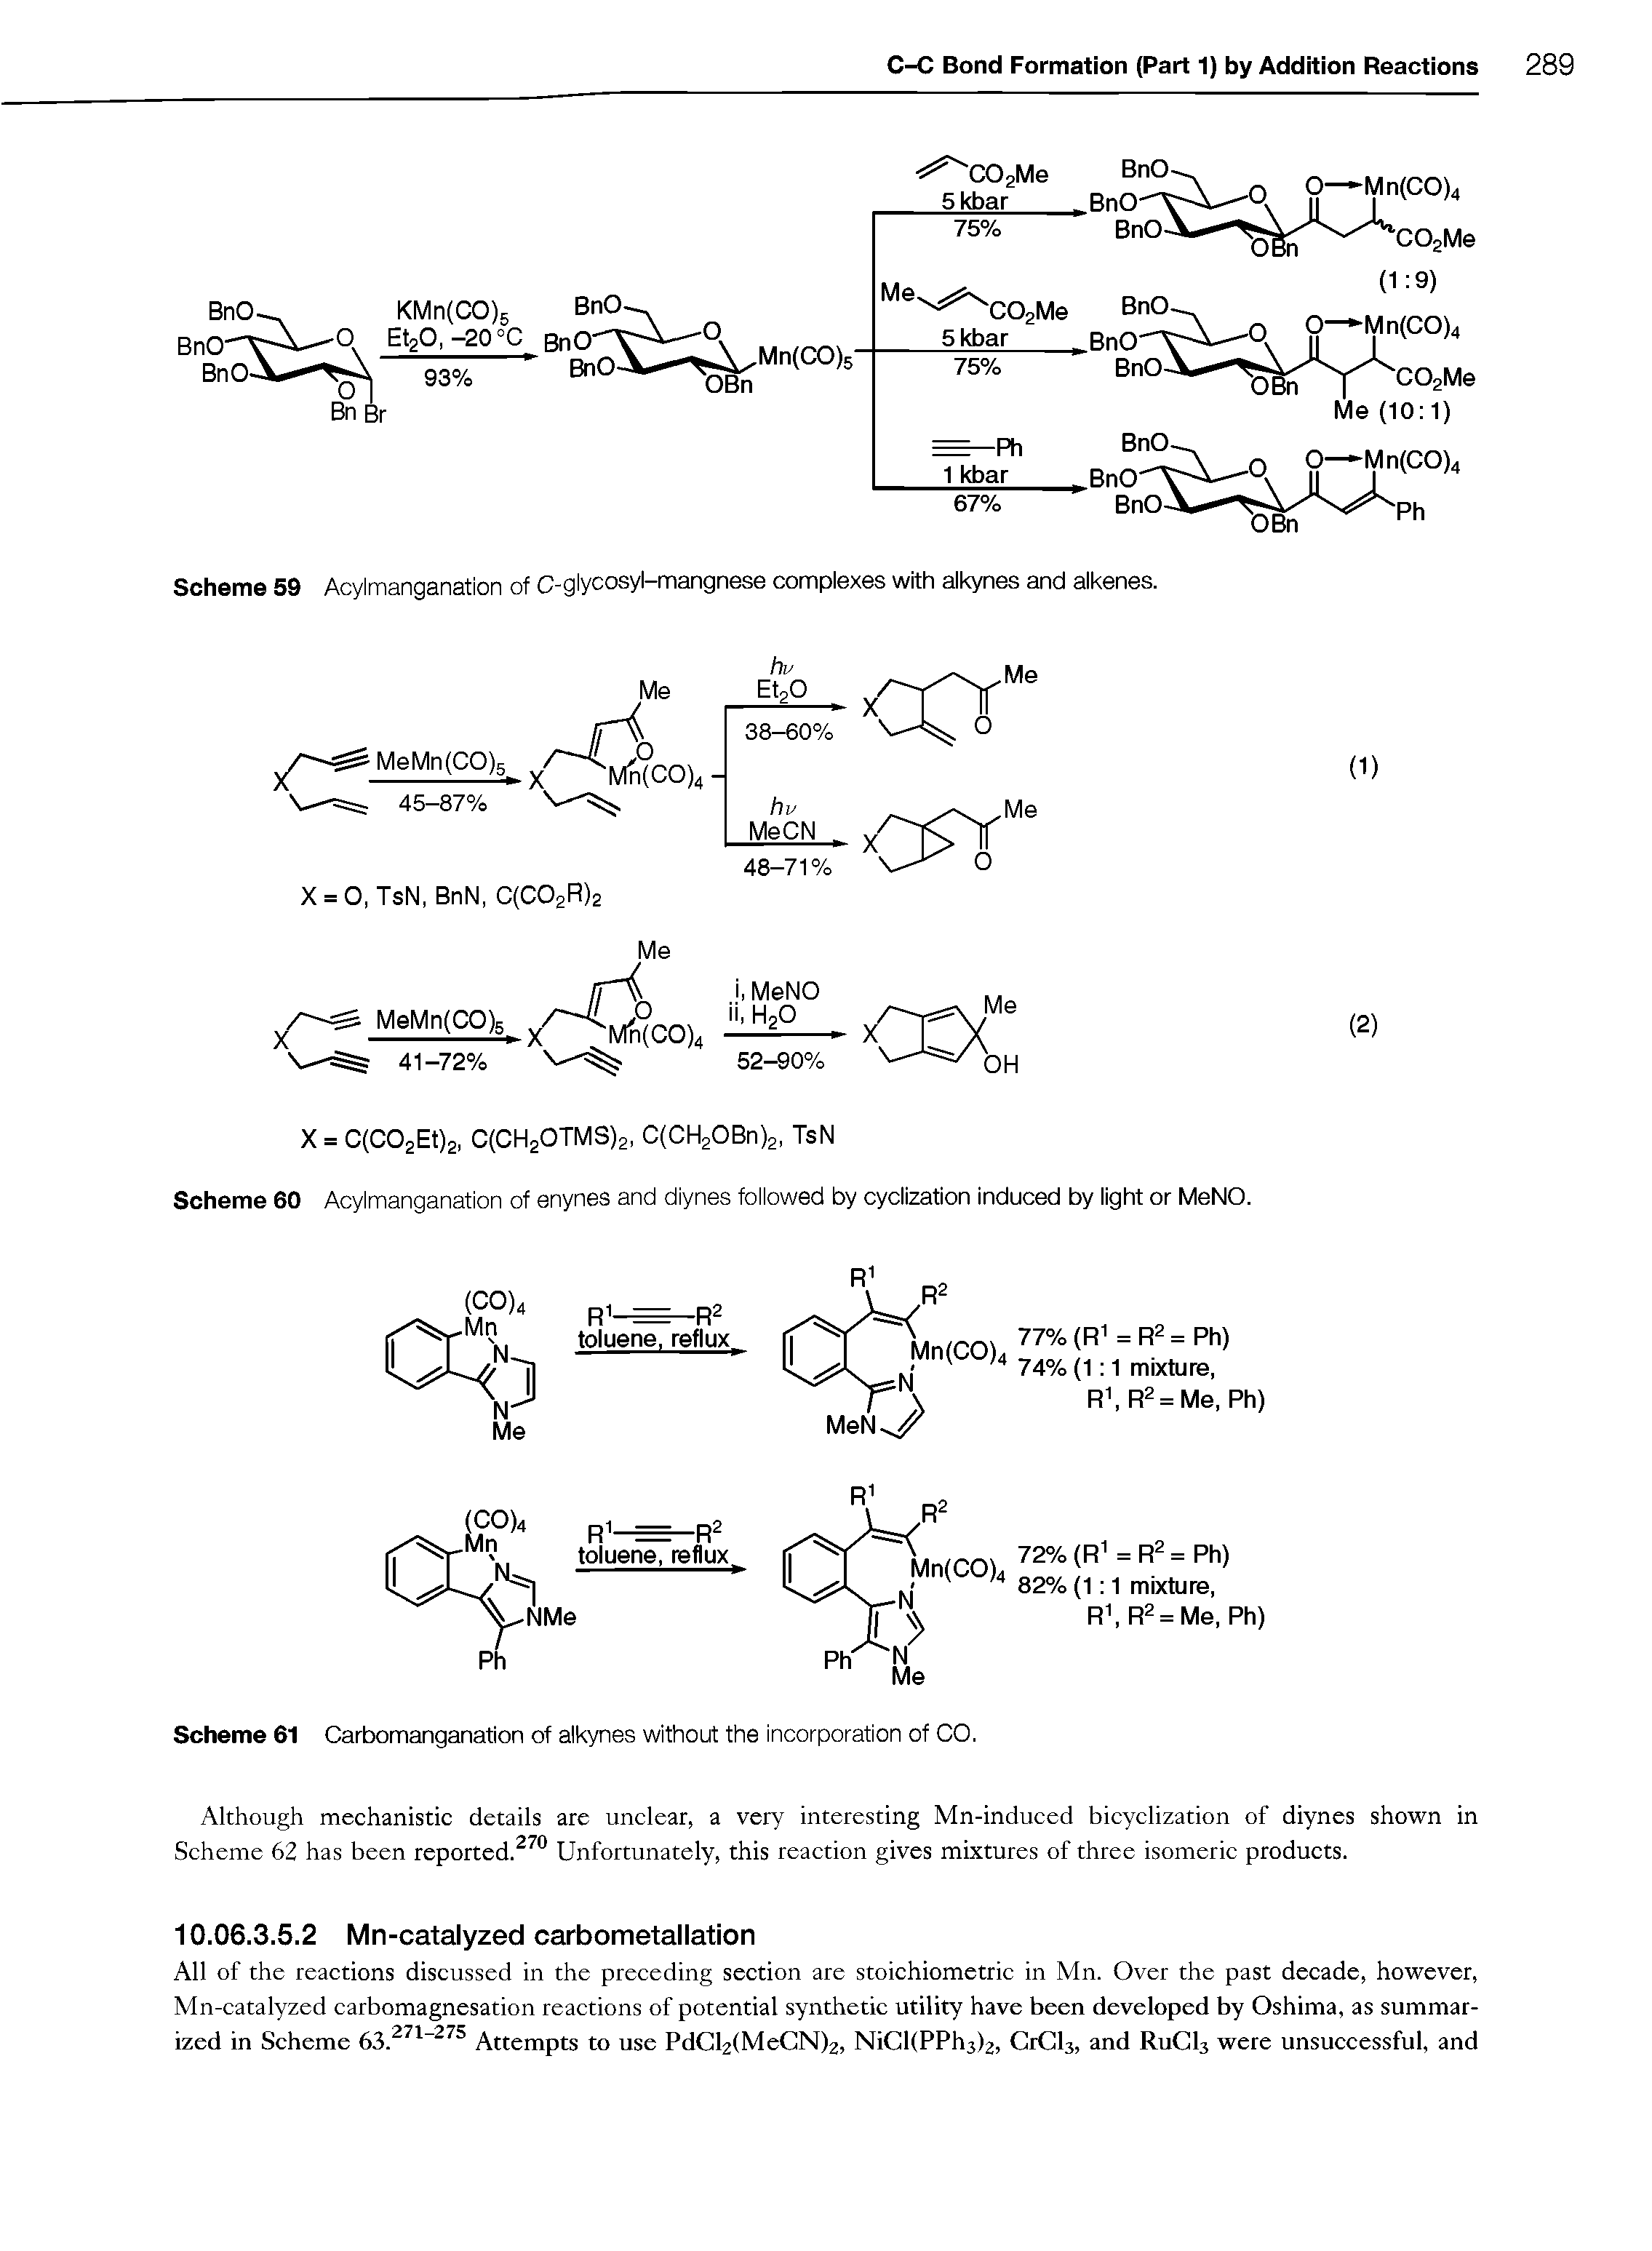 Scheme 60 Acylmanganation of enynes and diynes followed by cyclization induced by light or MeNO.